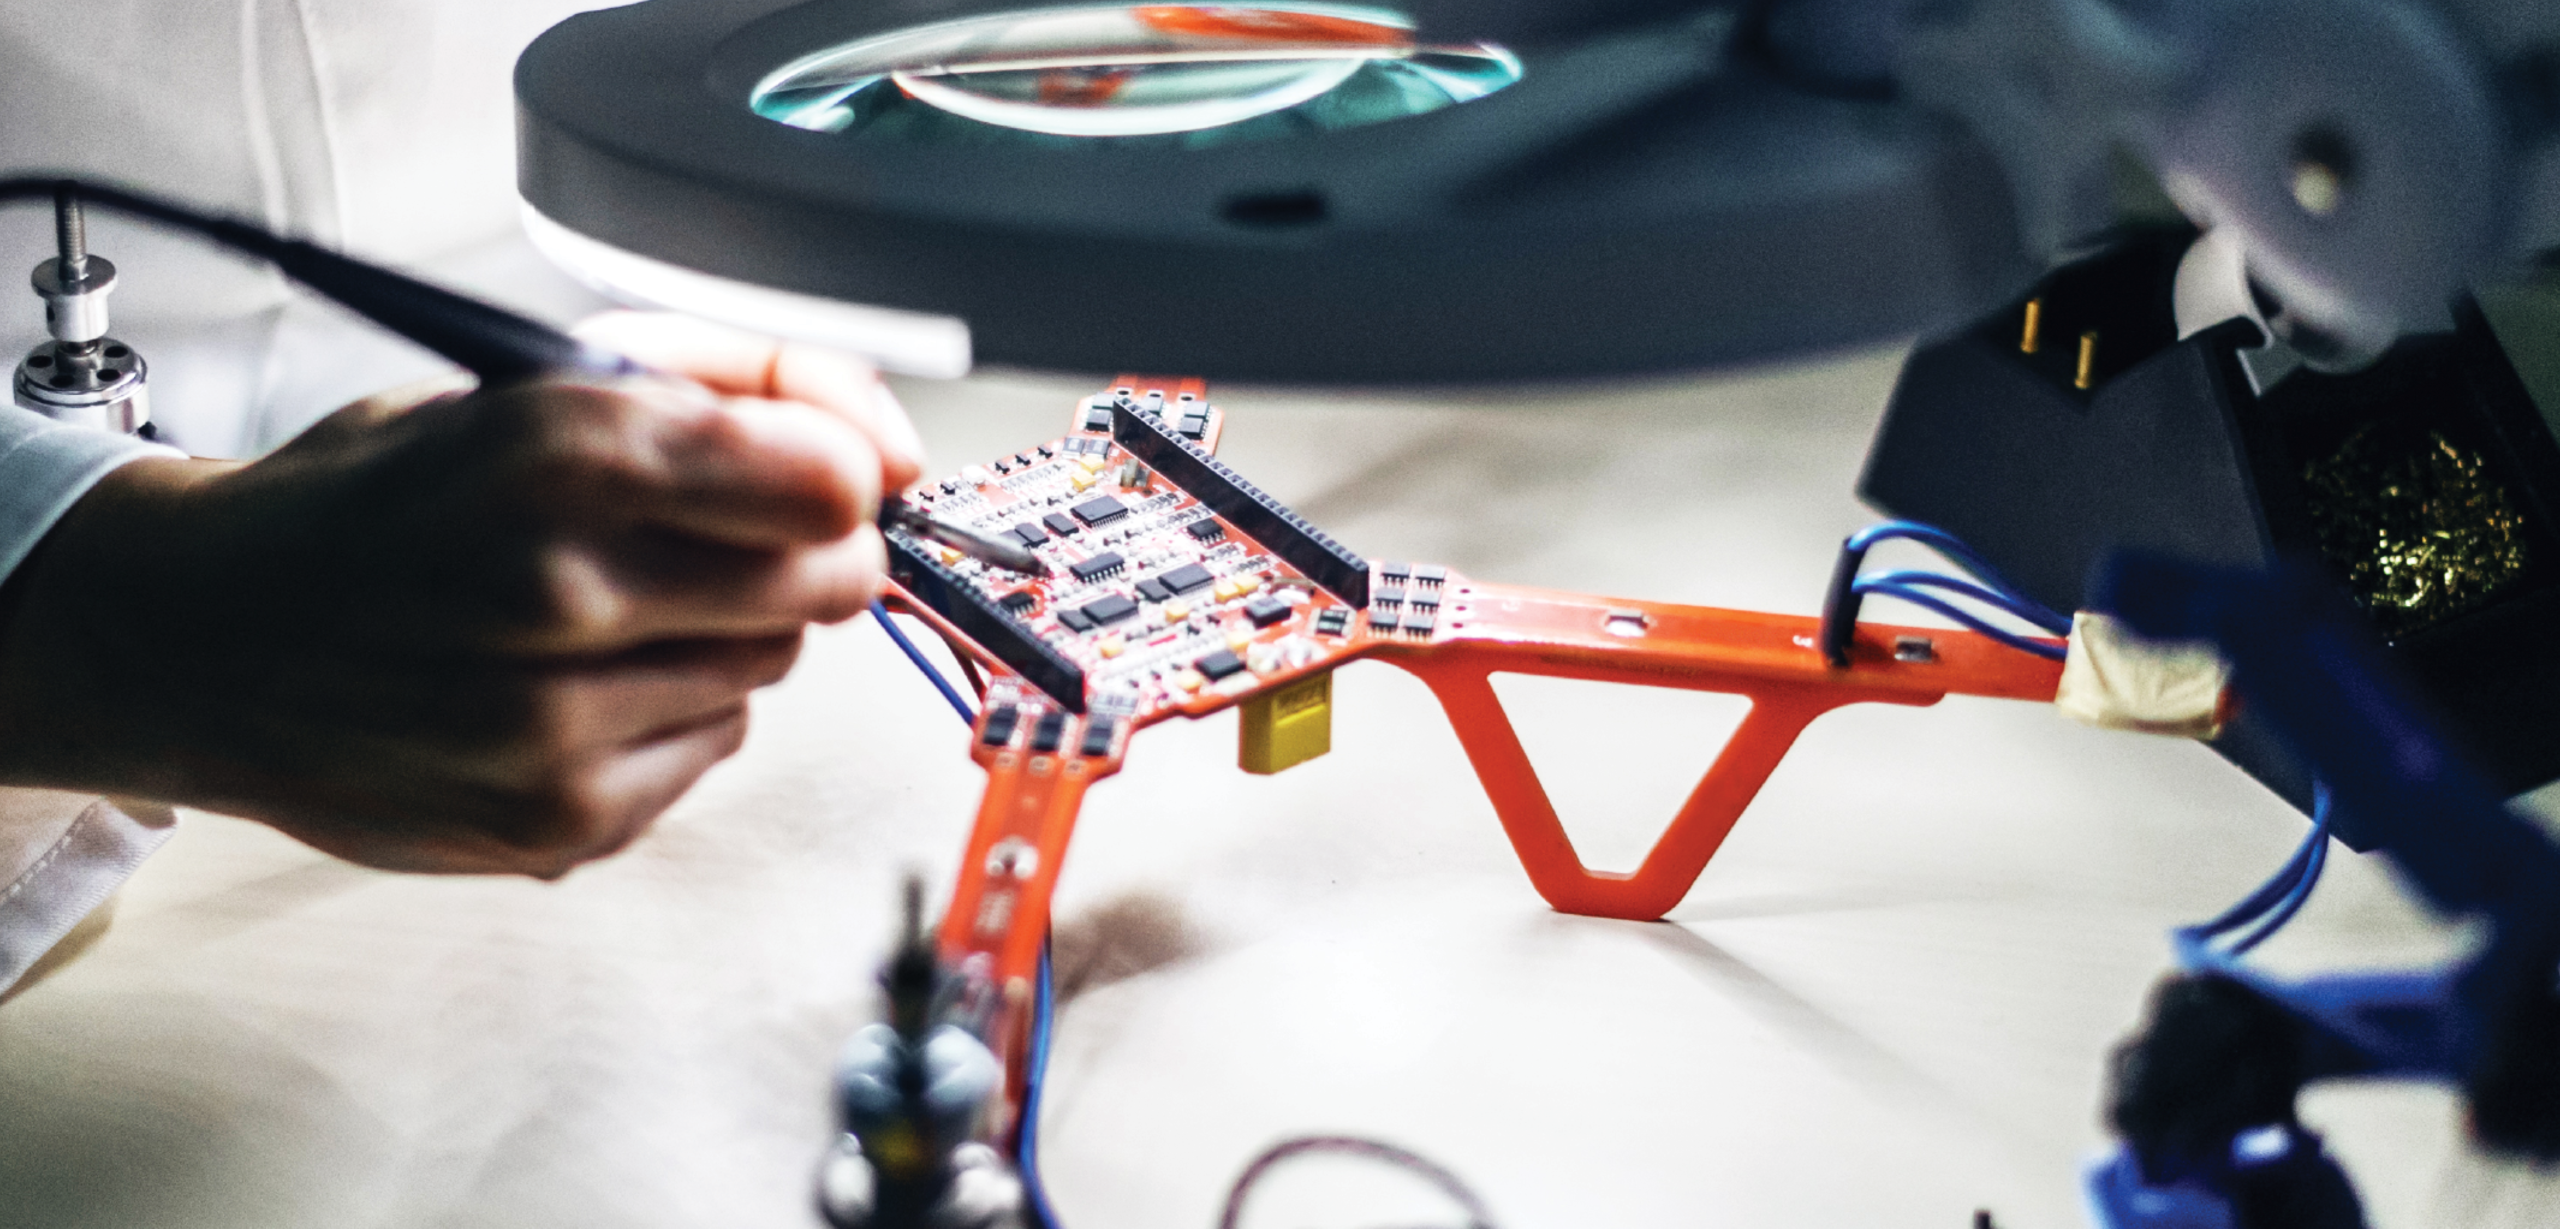 A drone airframe sits open on a table while a technician solders its motherboard.